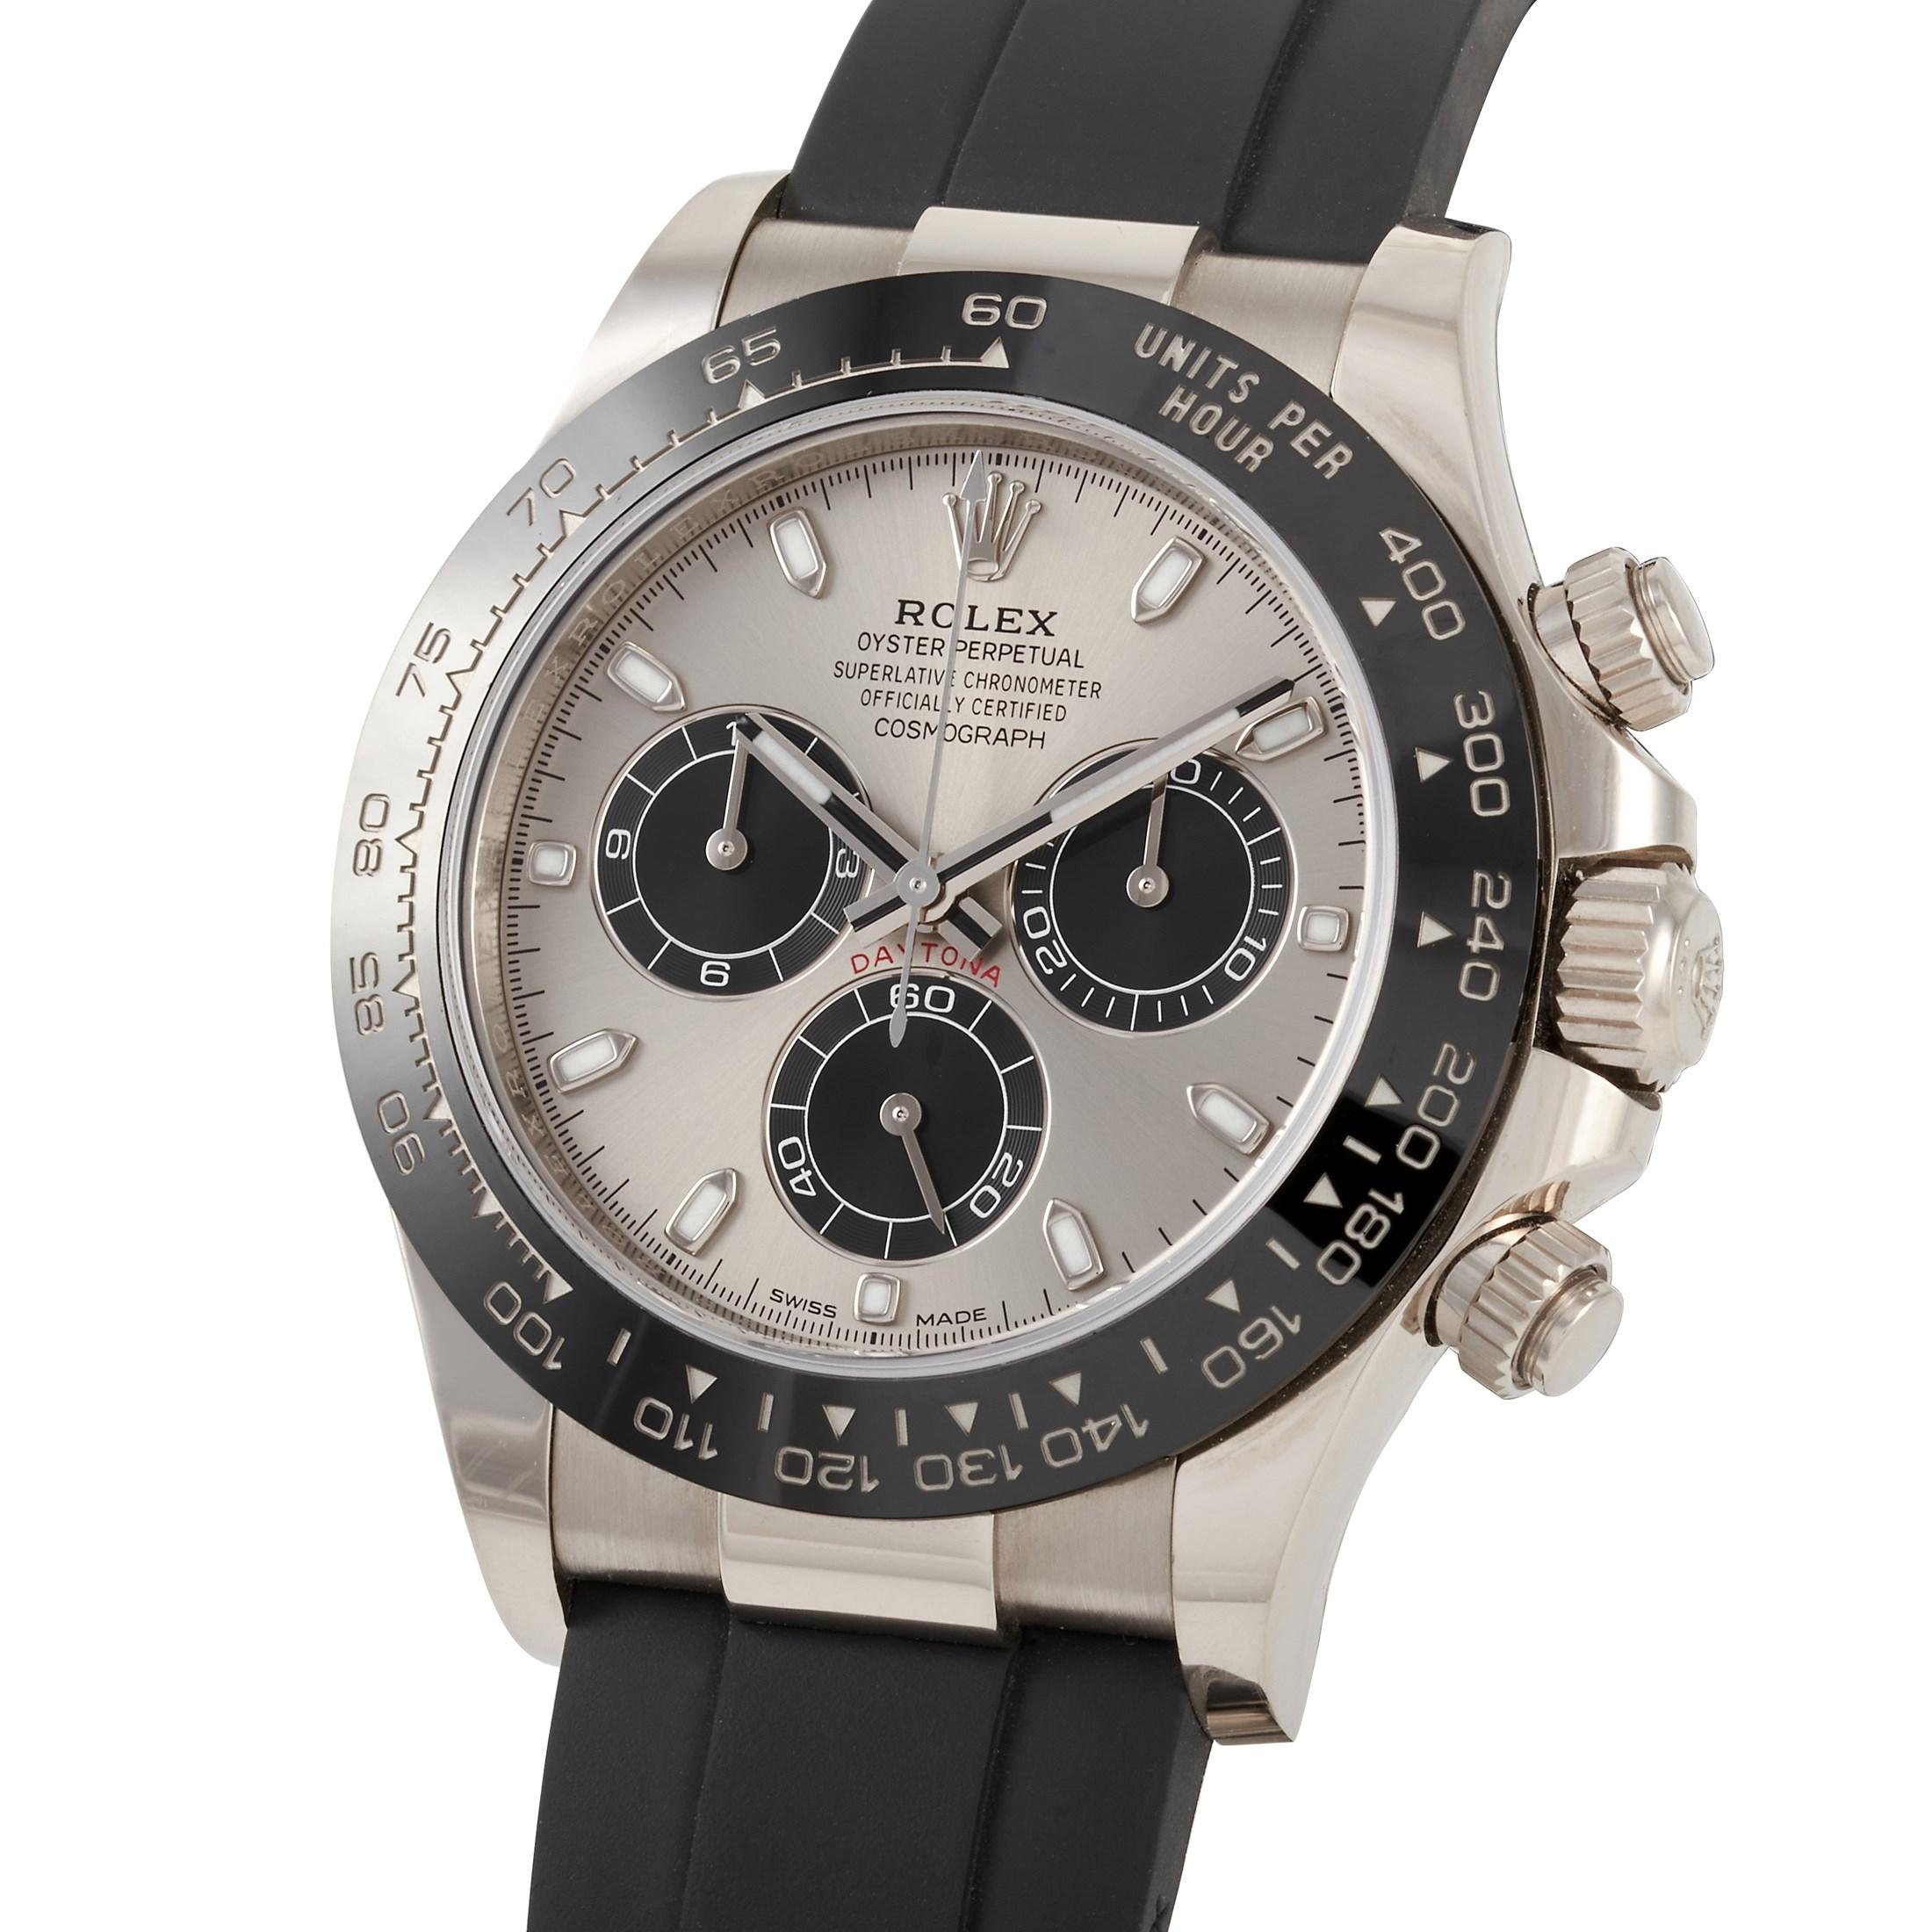 Attractive, unique, and sporty, the Rolex Cosmograph Daytona 18K White Gold Watch 116519LN will impress you with its unexpected yet exceptional style. It comes with a 40mm-wide case in 18K white gold with a black Cerachrom bezel. It is fitted with